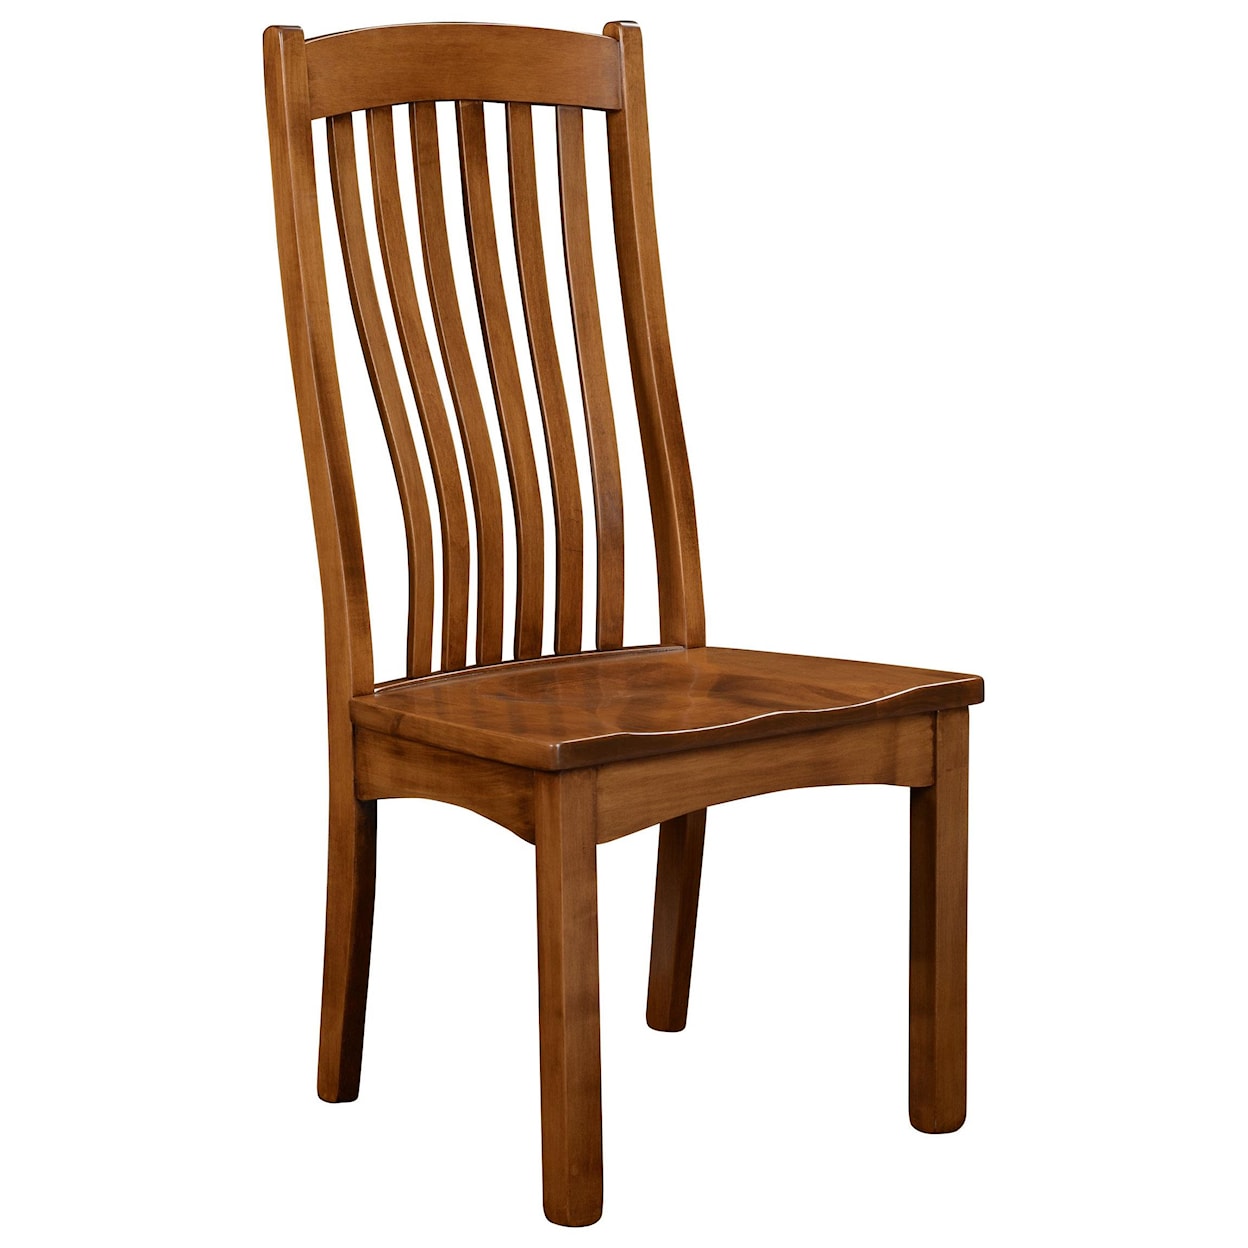 Wengerd Wood Products Liberty Side Chair